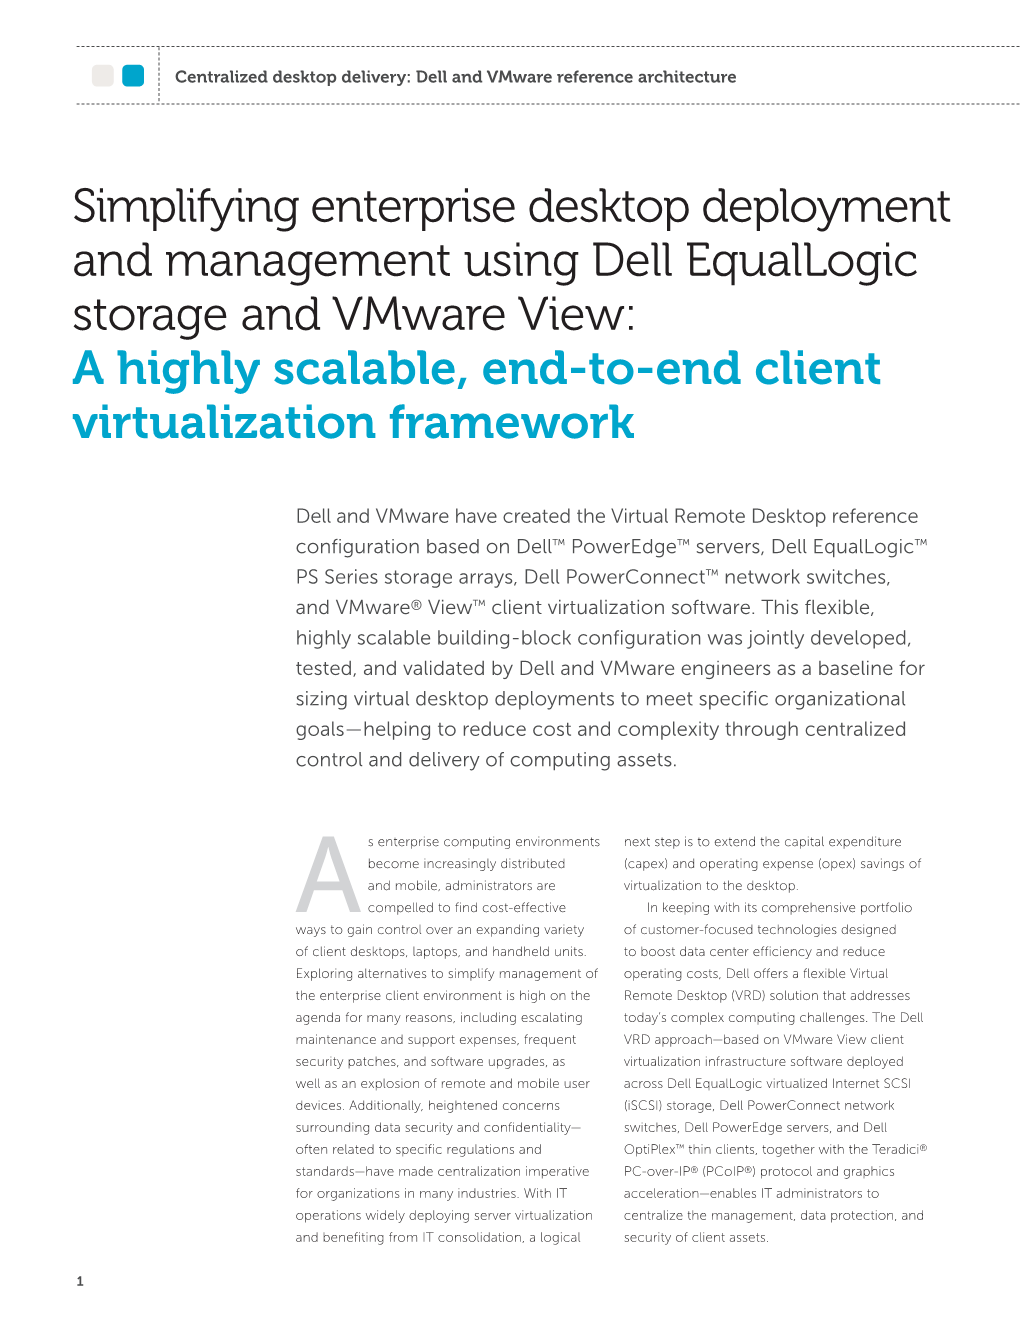 A Highly Scalable, End-To-End Client Virtualization Framework